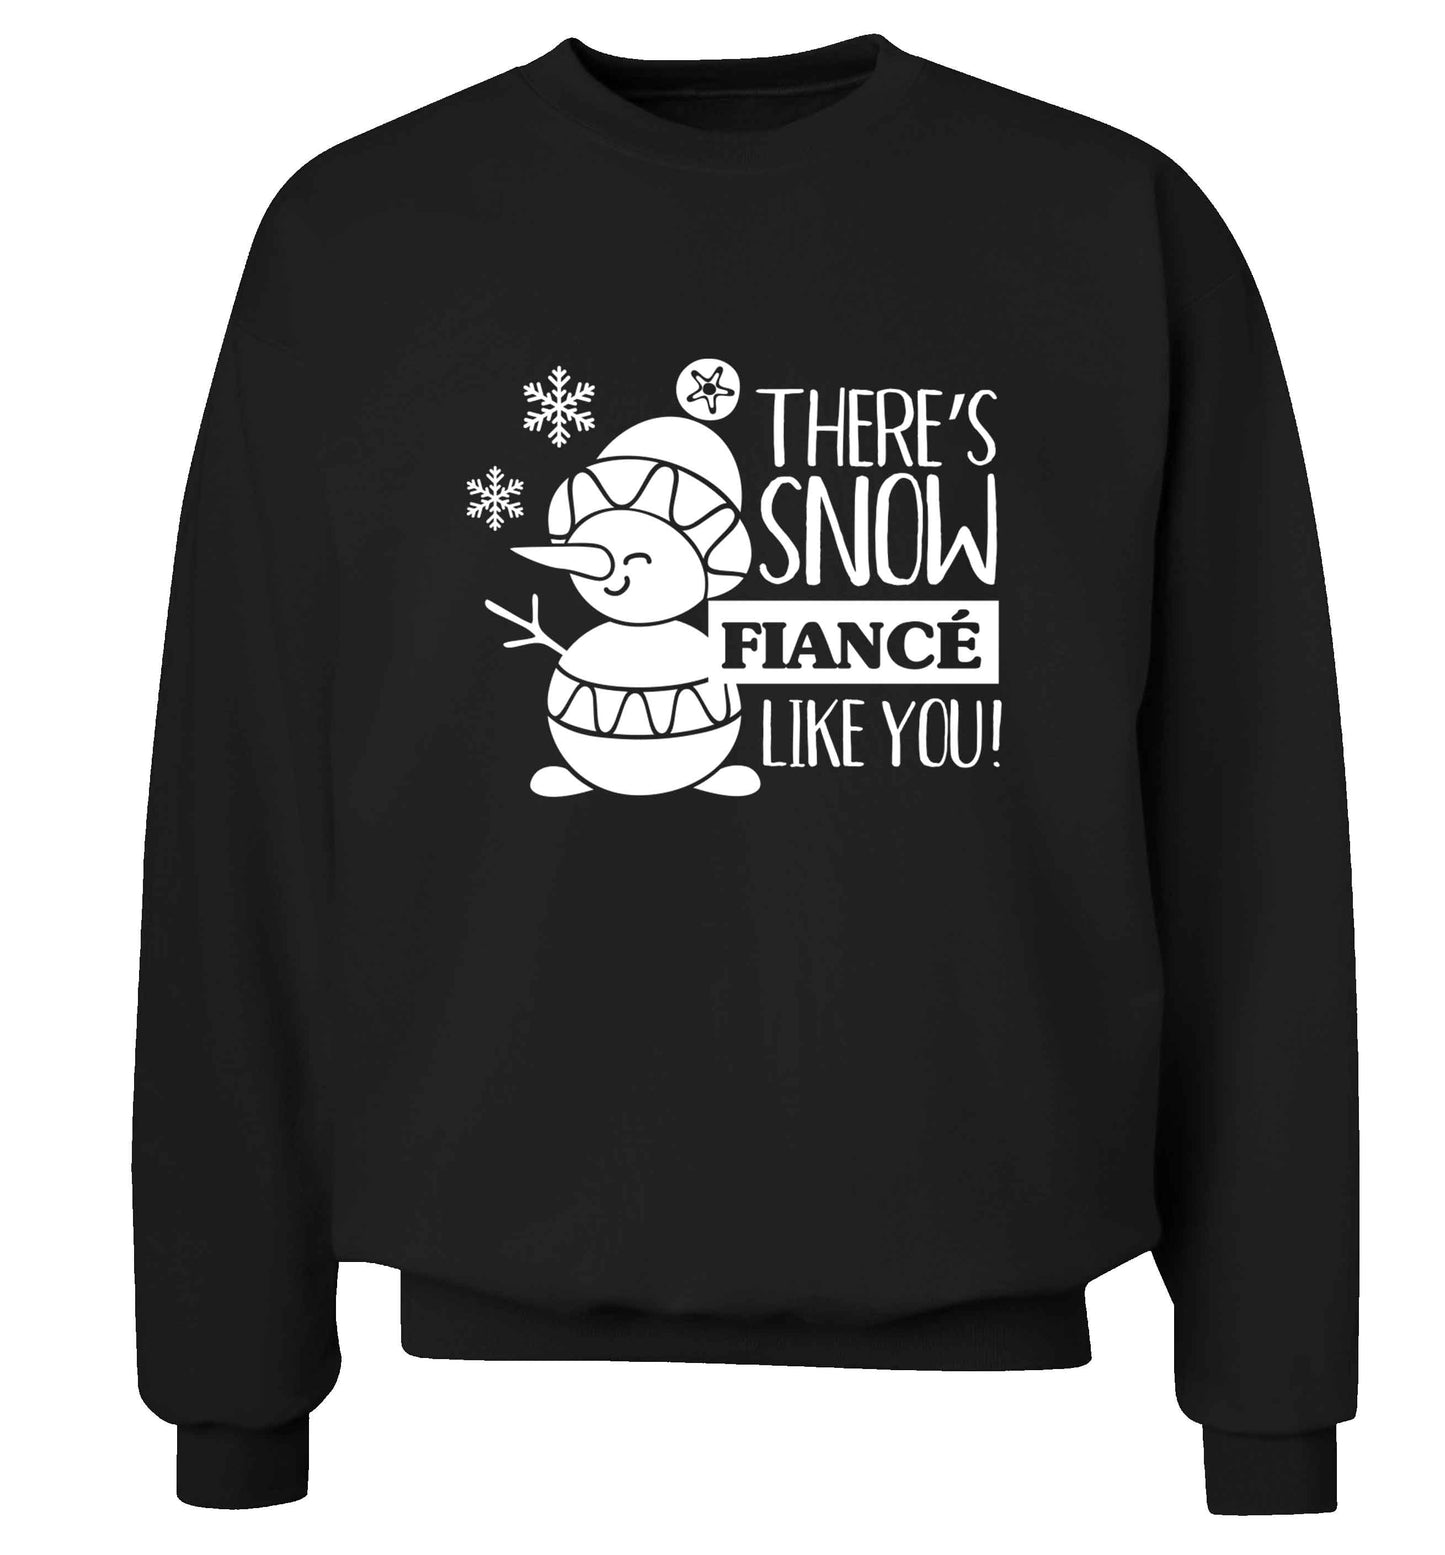 There's snow fiance like you adult's unisex black sweater 2XL